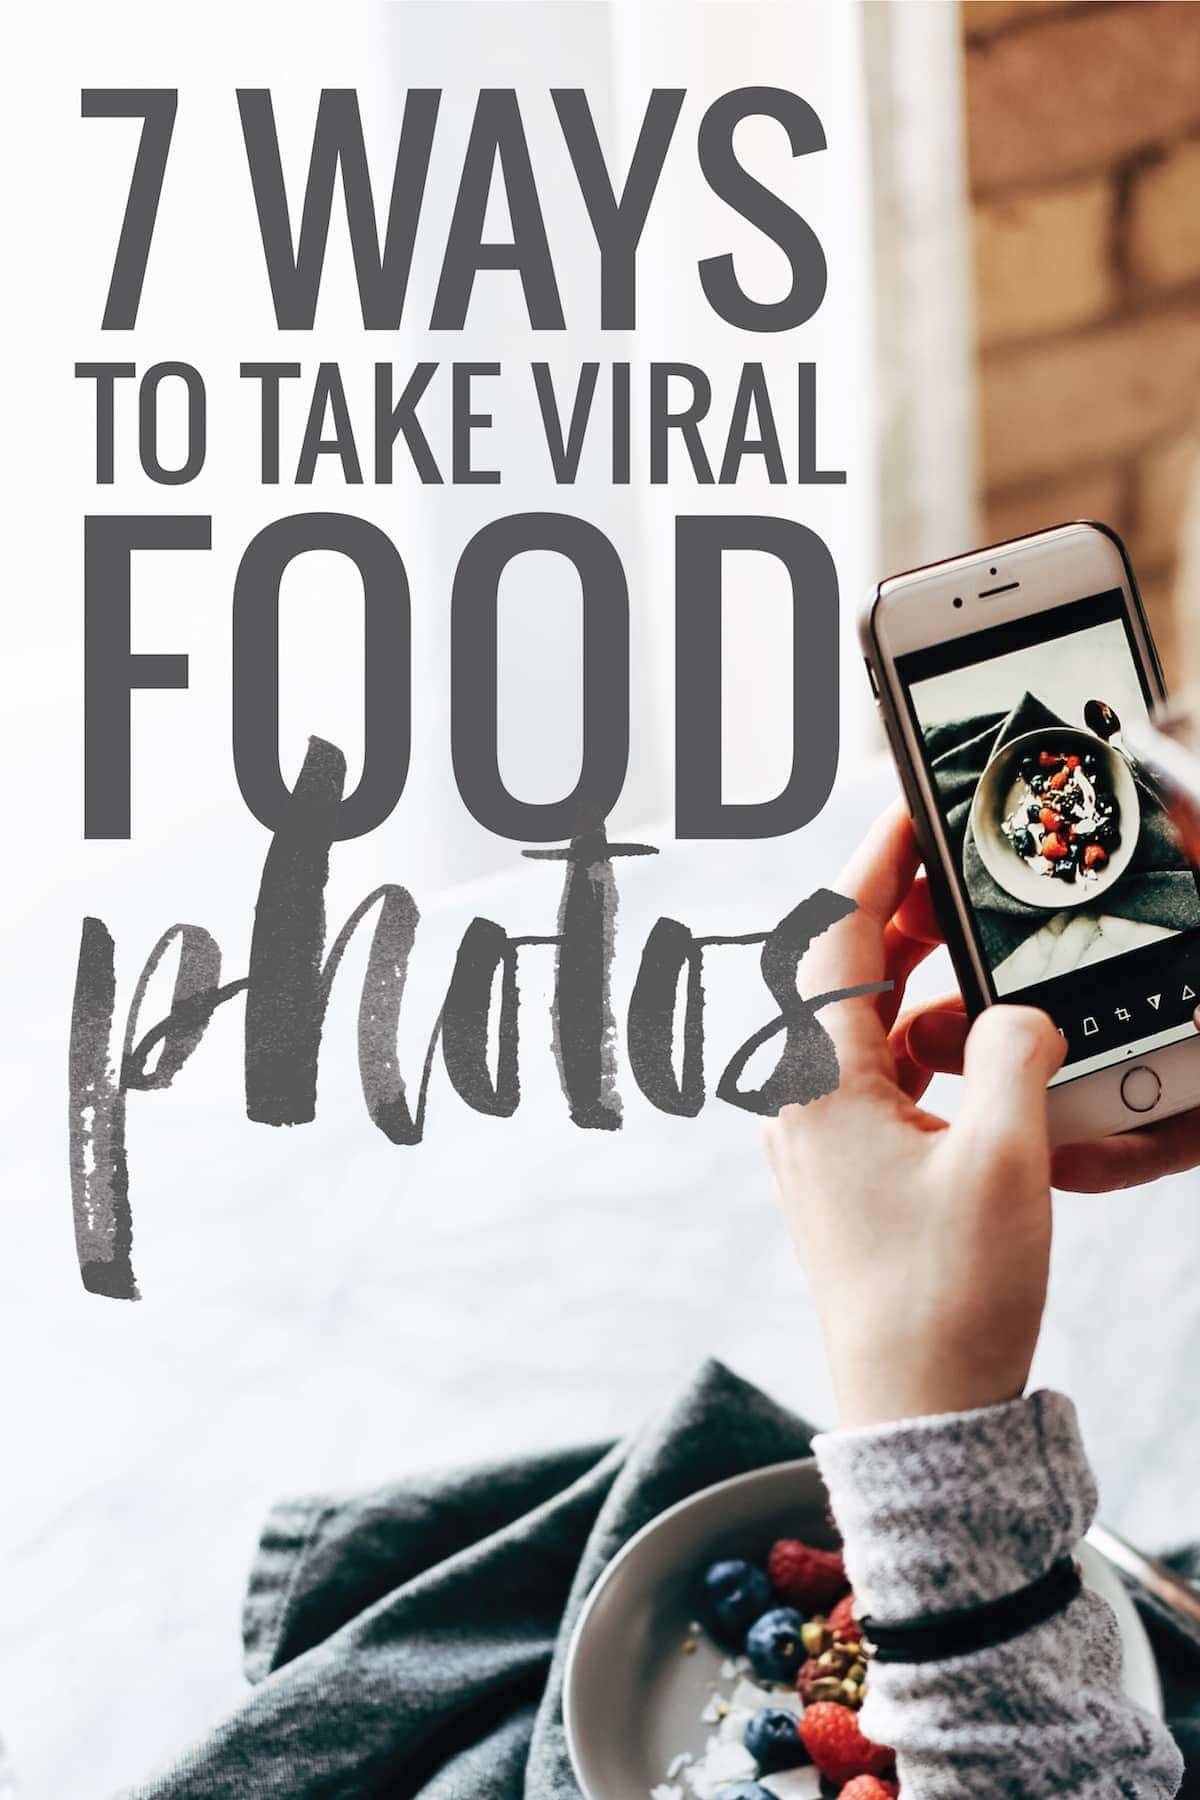 Hands holding an iPhone, taking a photo of food and the text 7 ways to take viral food photos